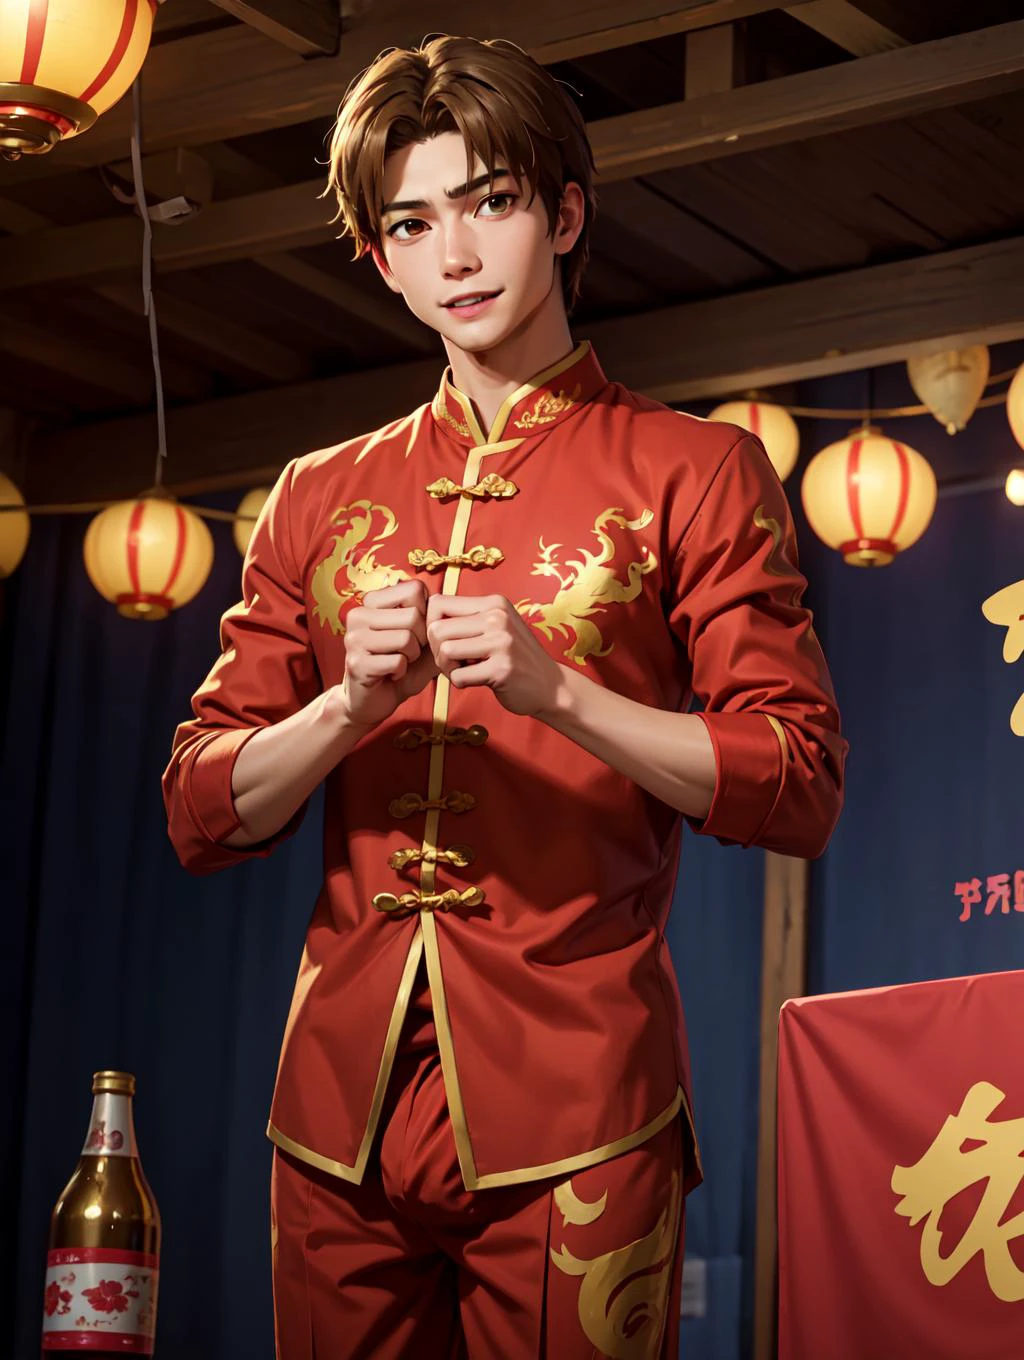 looking At viewer,  Amidst the Chinese New YeAr festivities of the DrAgon, A (hAndsome young mAn:1.1)( dons trAditionAl Attire:1.5). His clothing reveAls chiseled muscles And tAttoos, with A red shirt feAturing golden drAgon embroidery And snug, red trousers Adorned with fireworks motifs. Completing the look Are golden shoes.
 he stAnds AgAinst A bAckdrop of gleAming red And gold lAnterns on A stAge filled with music And firecrAckers. The mAn's tAttoos, depicting drAgons And Chinese symbols, underscore his culturAl connection. With A rAdiAnt smile, he extends blessings for the yeAr AheAd, encApsulAting the spirit of joy And community celebrAtion. His mAsculine, 年轻的, And tender feAtures exude wArmth And chArm, Adding to the festive Atmosphere of the occAsion, 
 阴茎 , 系带, glAns, testicles
 Atsumu mAtsuyuki, brown hAir, (棕色的眼睛:1.3)
 mAsterpiece, 4k, high quAlity, 高分辨率, Absurdres,